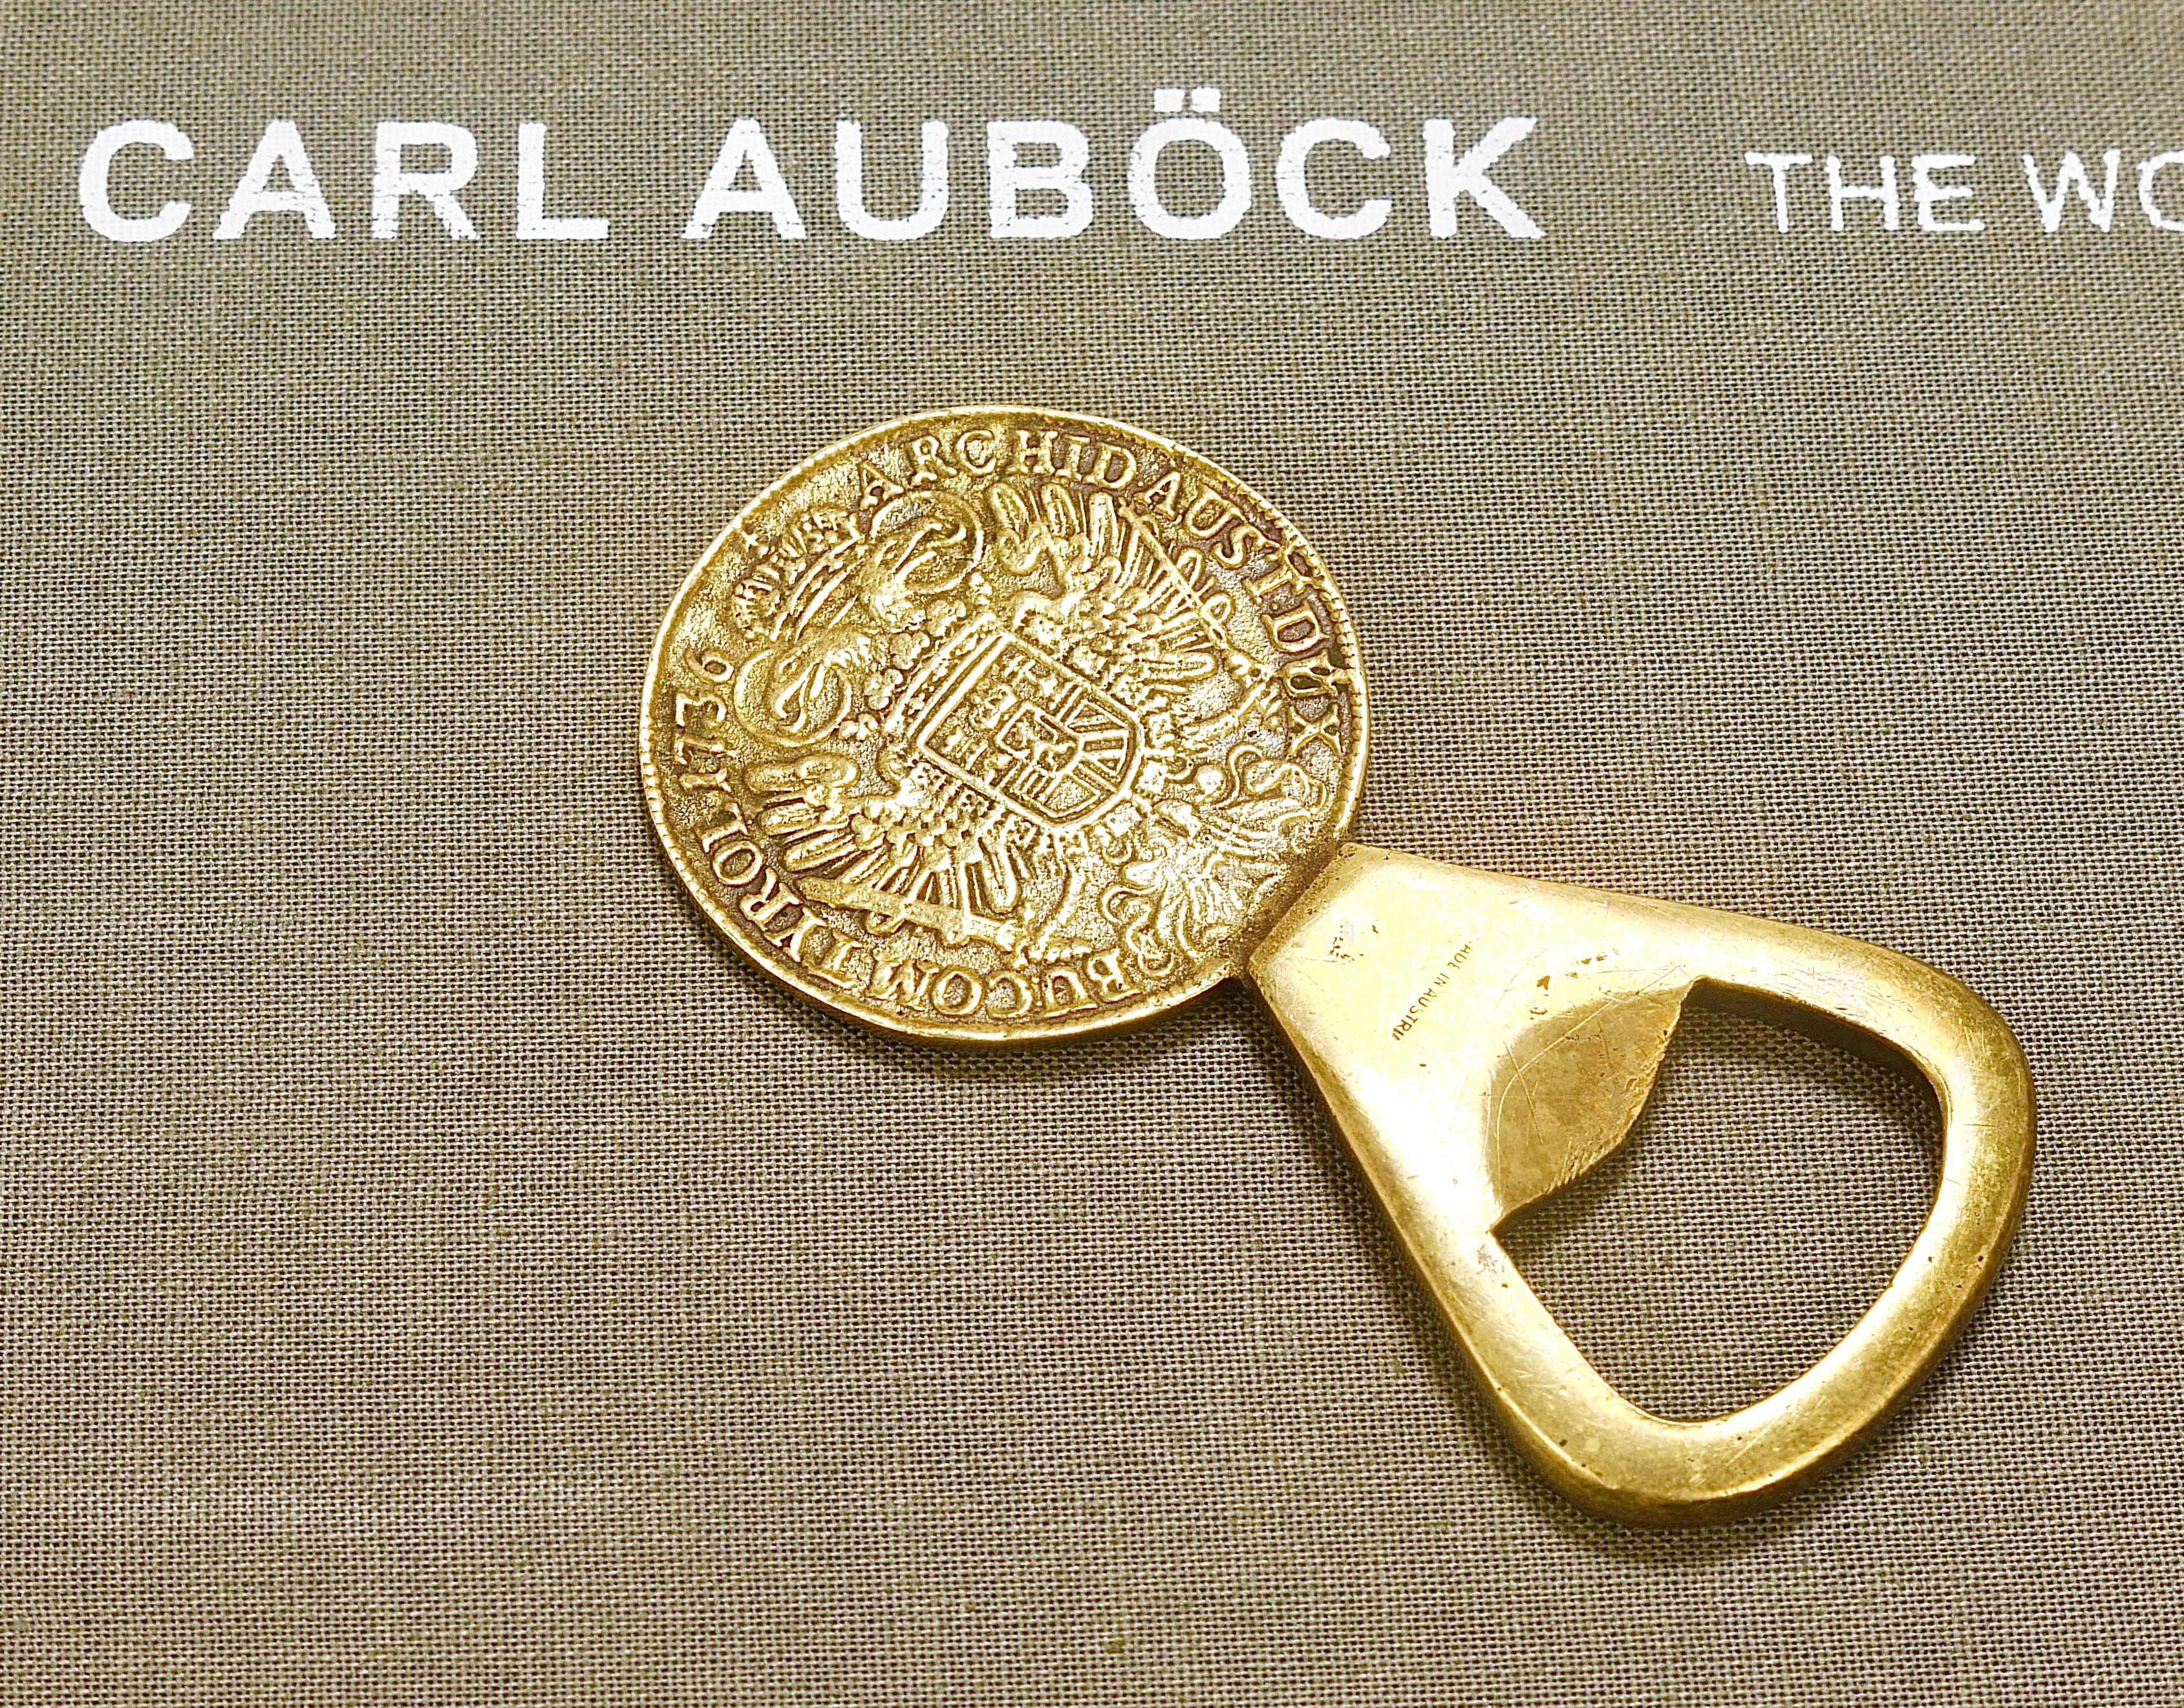 A beautiful solid brass bottle opener, designed and executed by Carl Auböck II in the 1950s. Marked: Made in Austria. In good condition with nice patina.